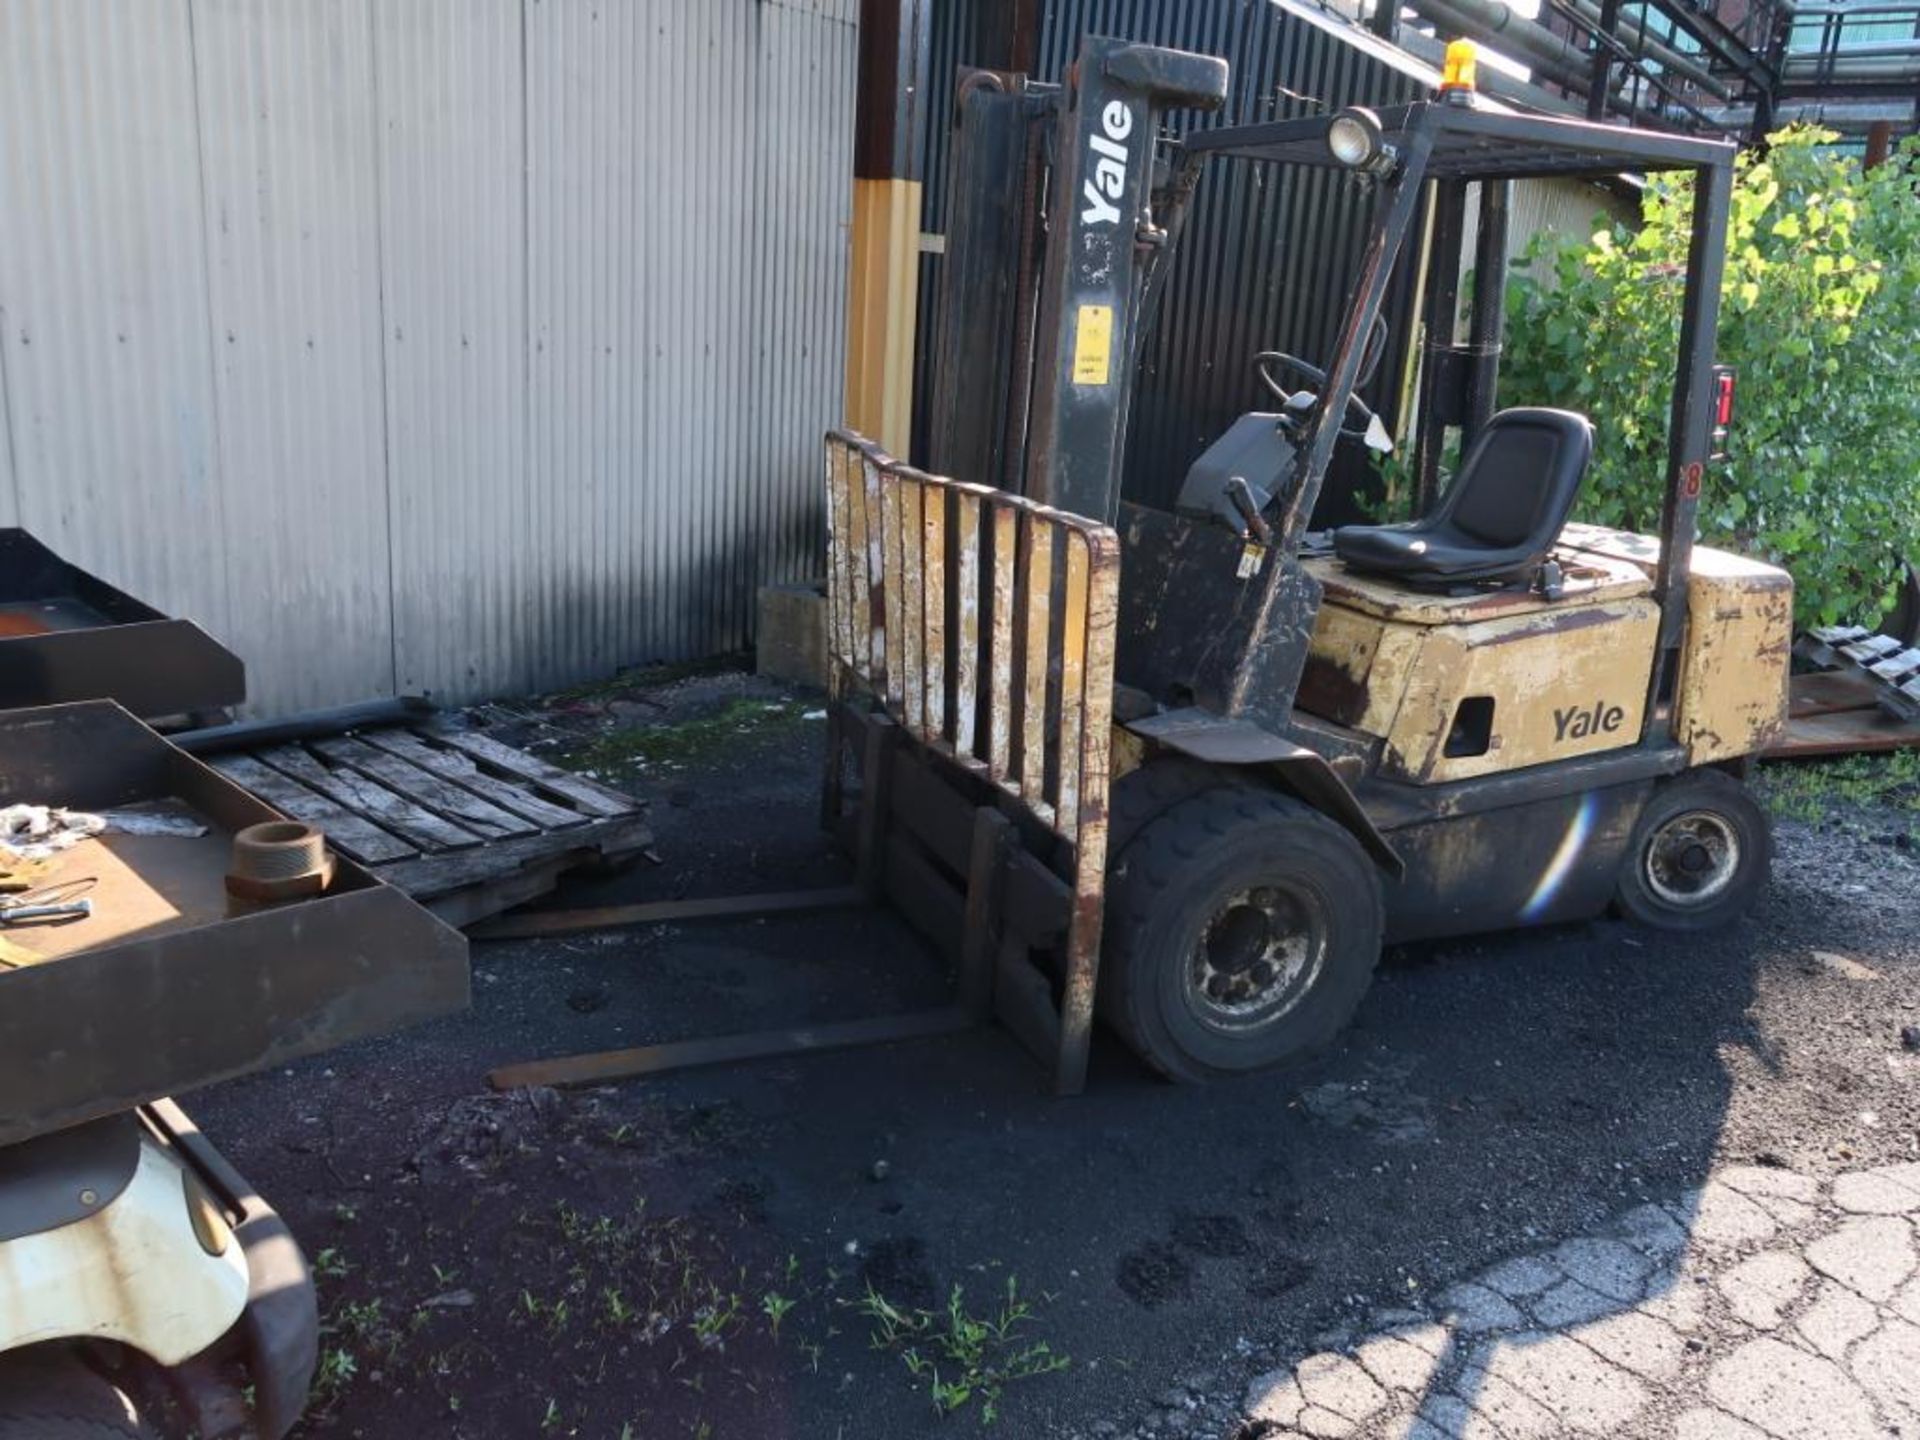 Yale Diesel Forklift 8000 lb (est), Dual Pneumatic Tires, Overhead Guard, 2-Stage Mast, (needs